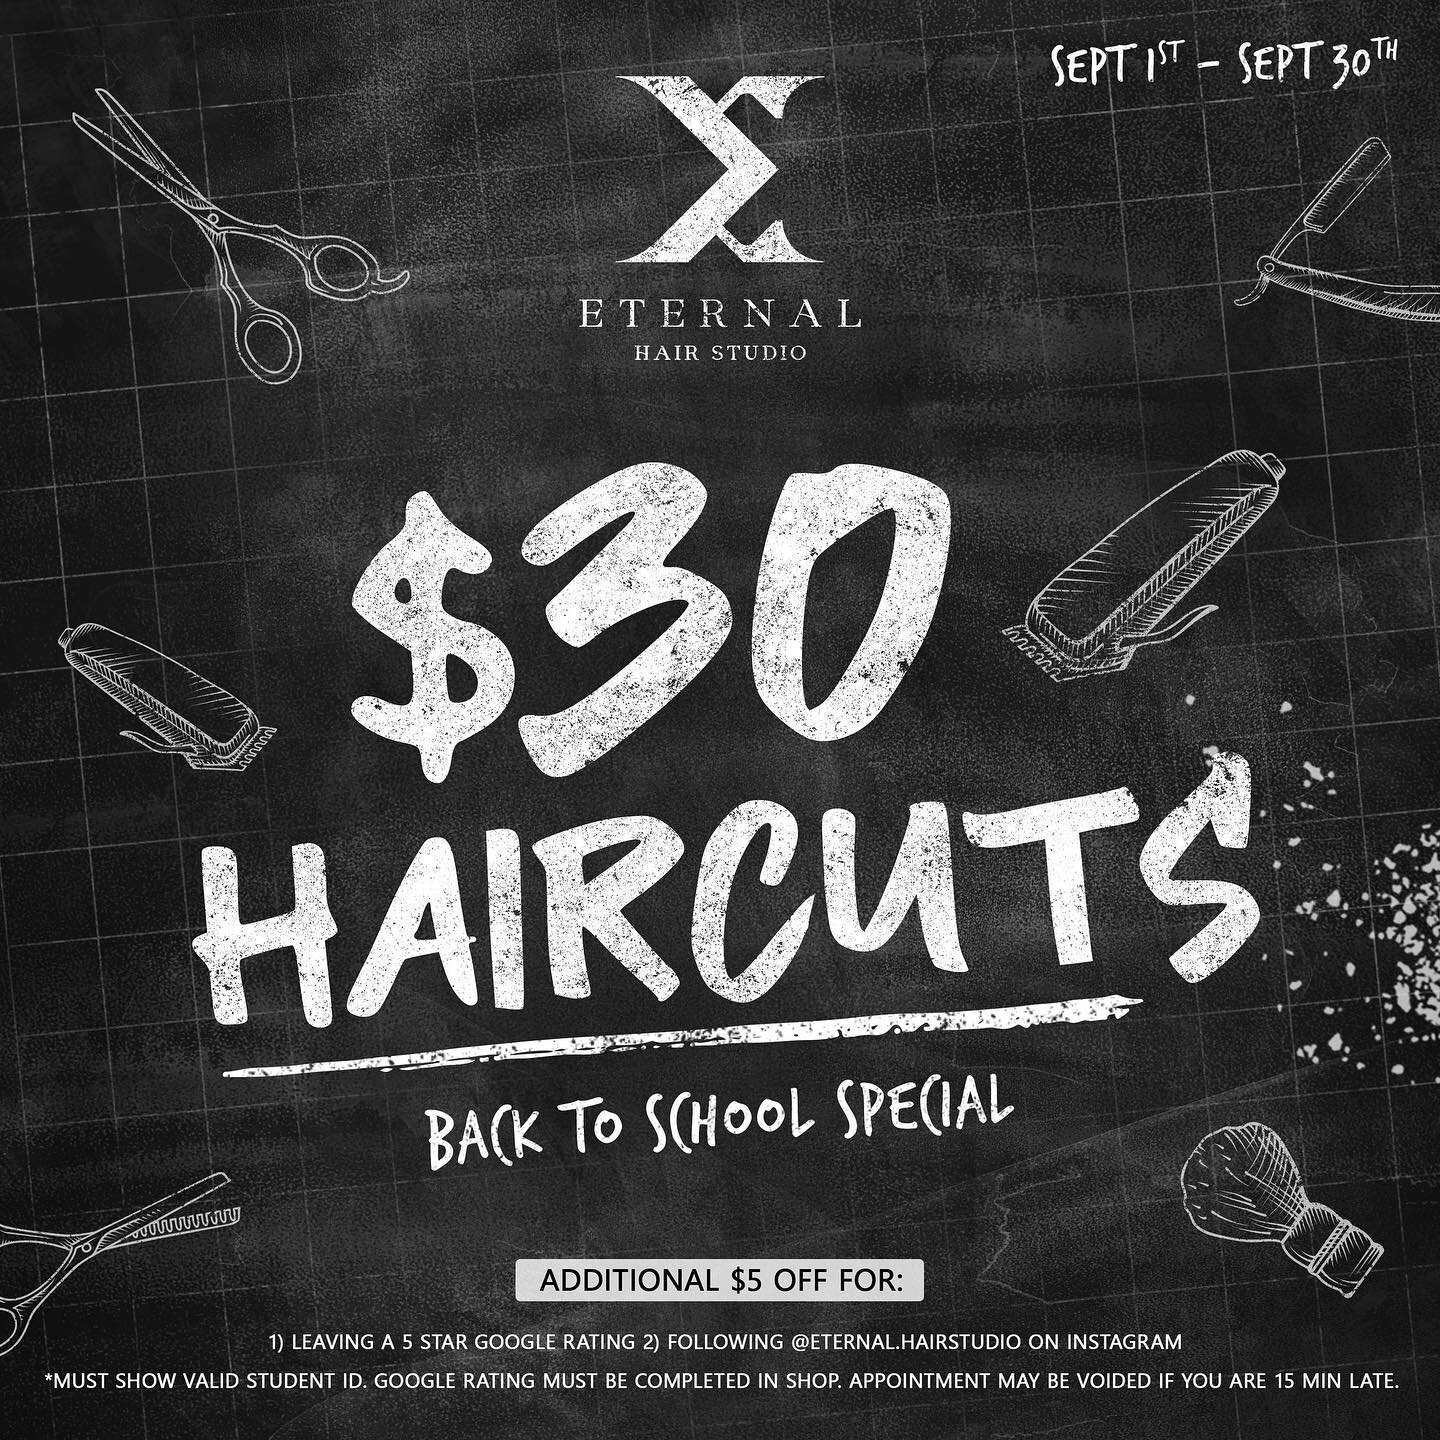 Back To School Special is here for the entire month of September. We're offering $30 haircuts for all students heading back to school. To redeem this offer, book an appointment and select the 'Back To School' promo only for specific barbers.

BONUS O